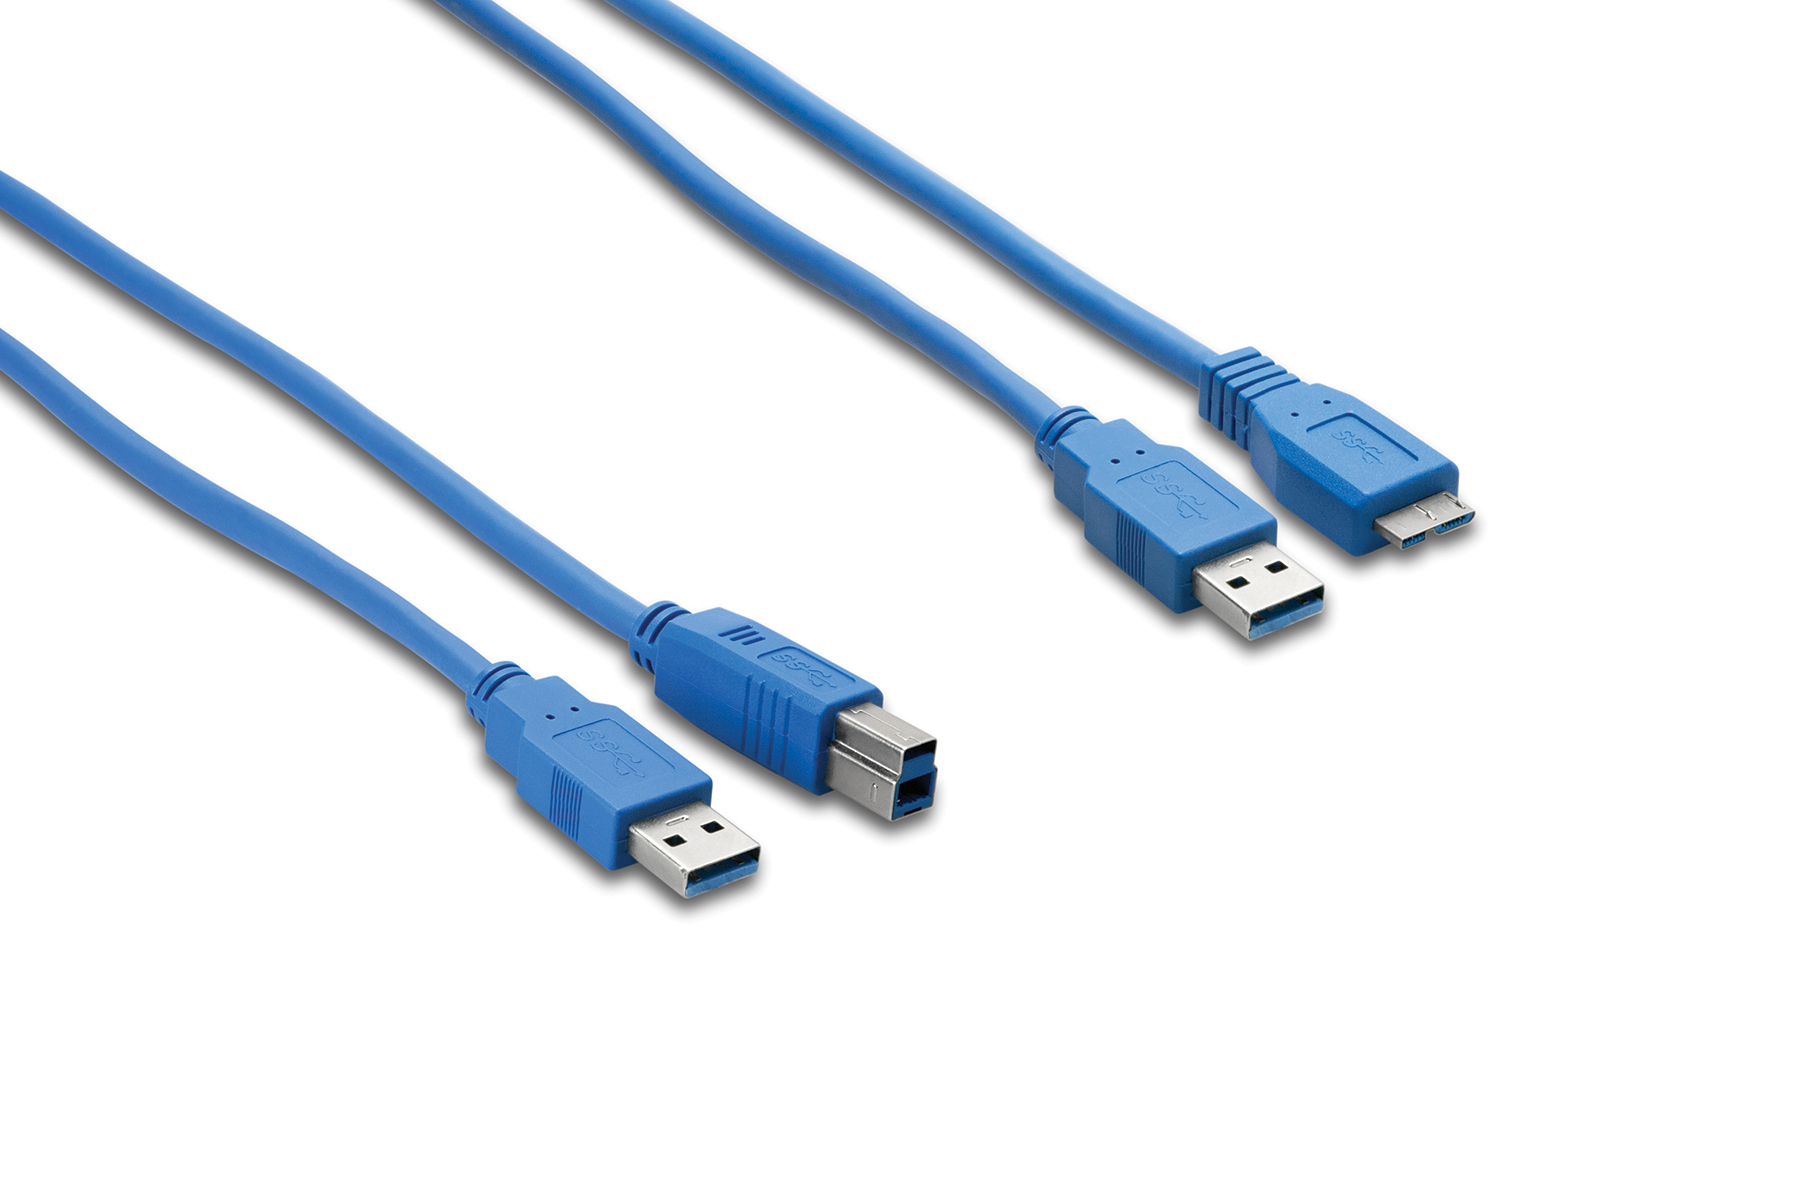 Hosa Technology USB 300 Series SuperSpeed USB 3.0 cables